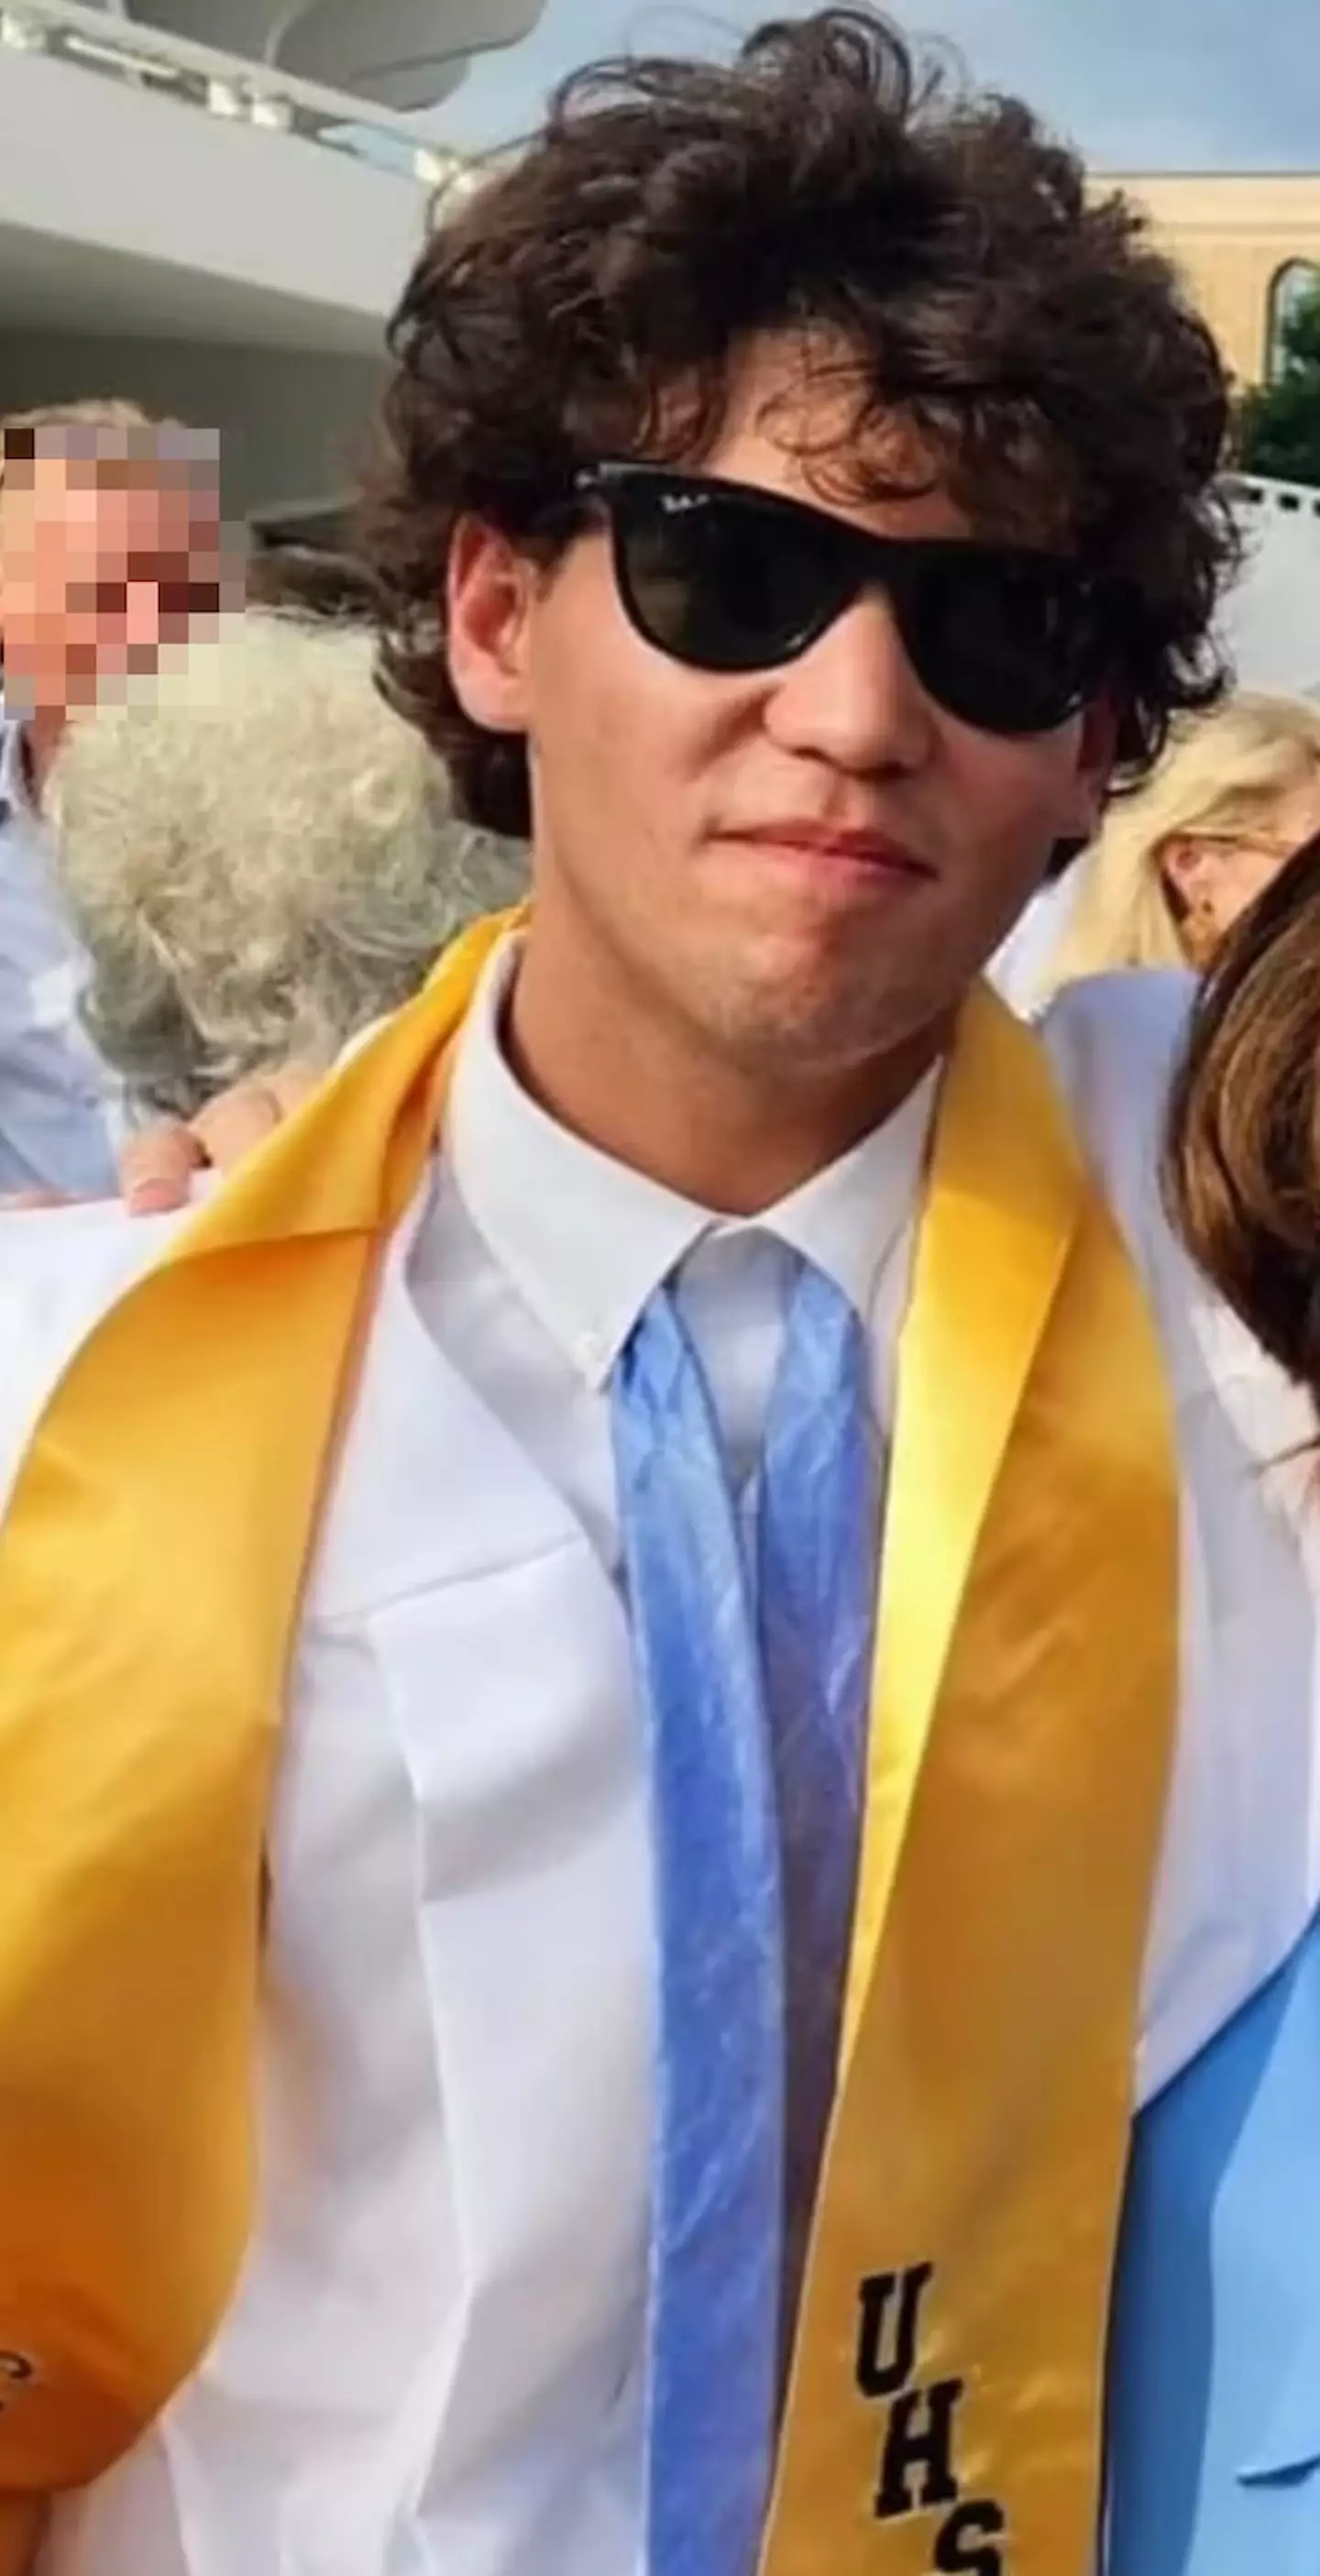 Cameron Robbins graduated high school this month.